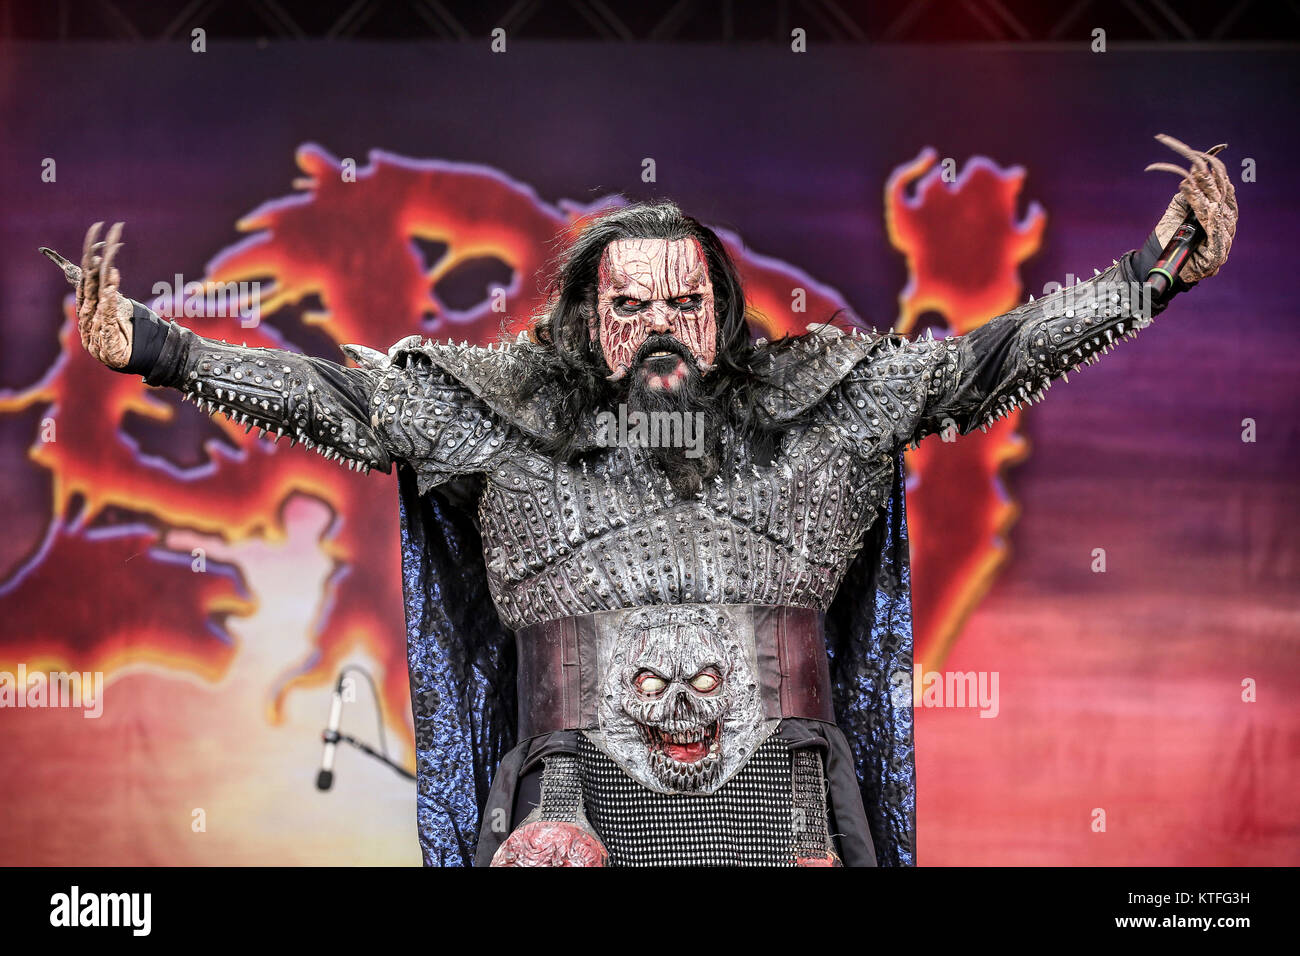 The Finnish hard rock band Lordi performs a live concert at the Swedish music festival Sweden Rock Festival 2016. Here vocalist Mr Lordi is seen live on stage. Sweden, 09/06 2016. Stock Photo